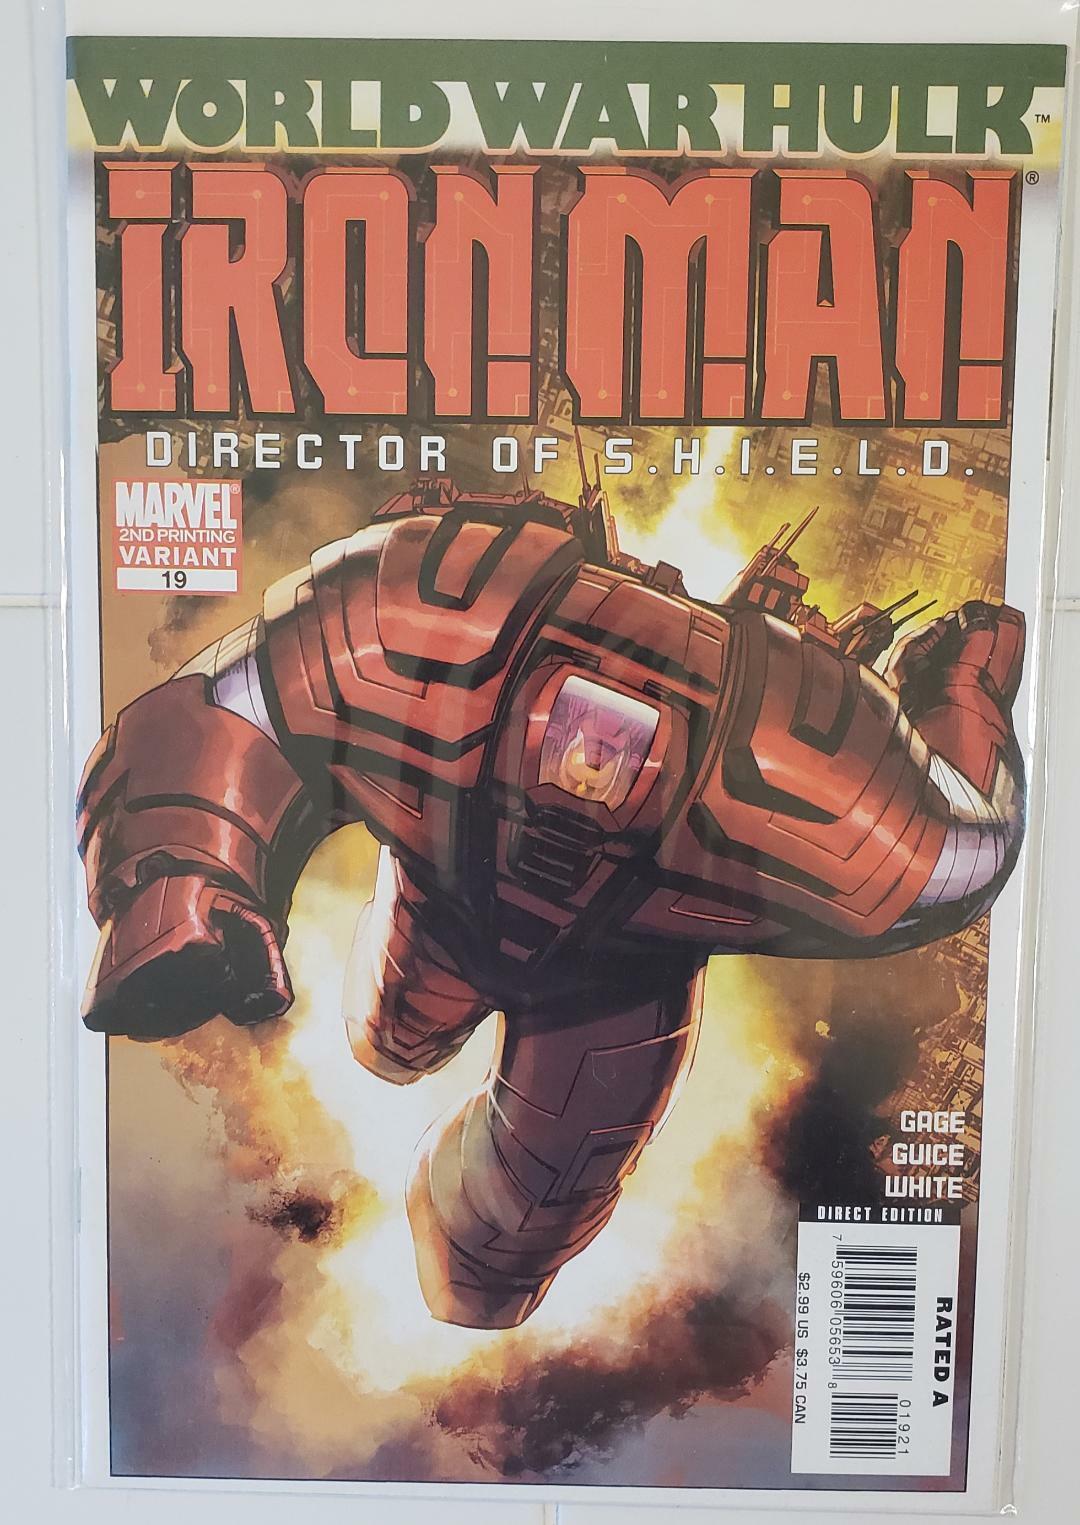 Iron Man: Director of S.H.I.E.L.D. #19 2ND PRINTING 2007 Variant